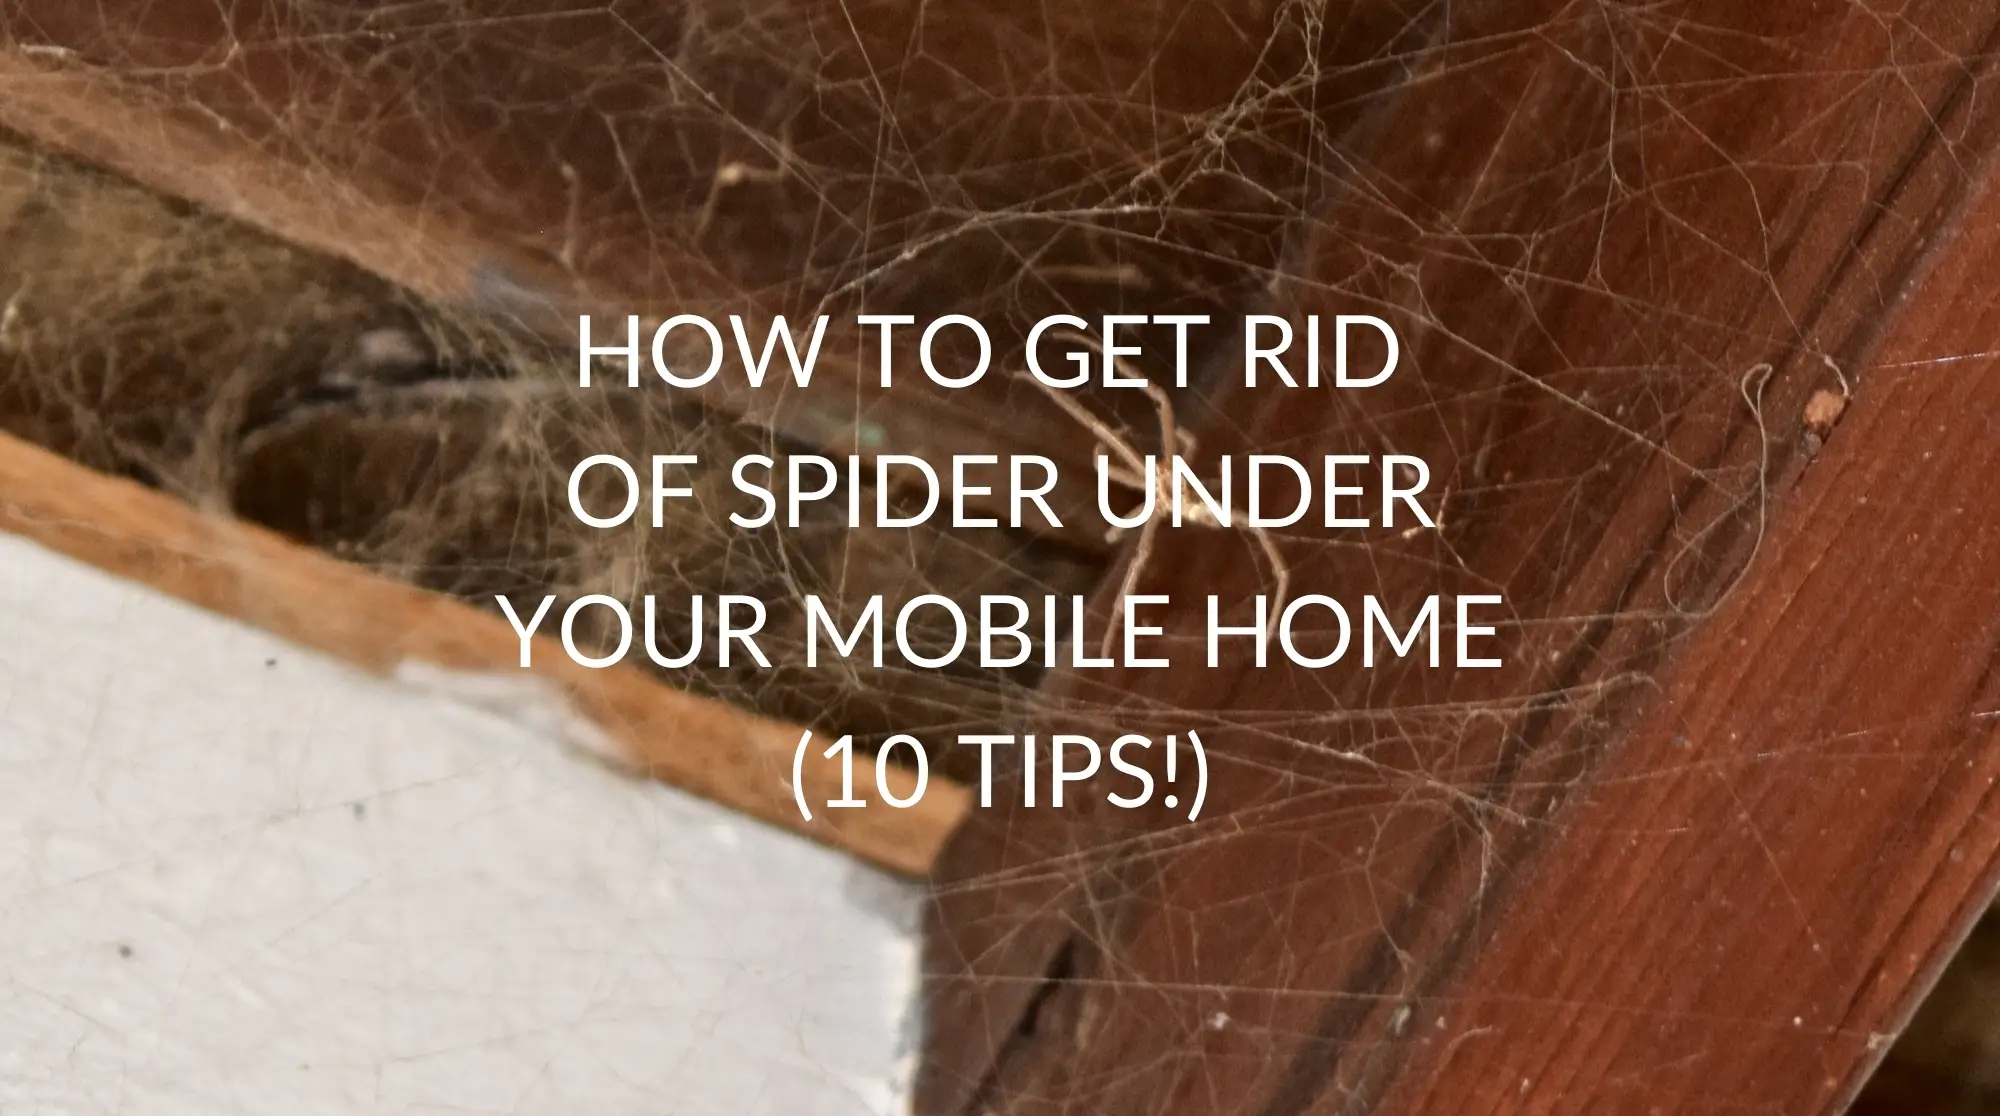 How To Get Rid Of Spider Under Your Mobile Home (10 Tips!)